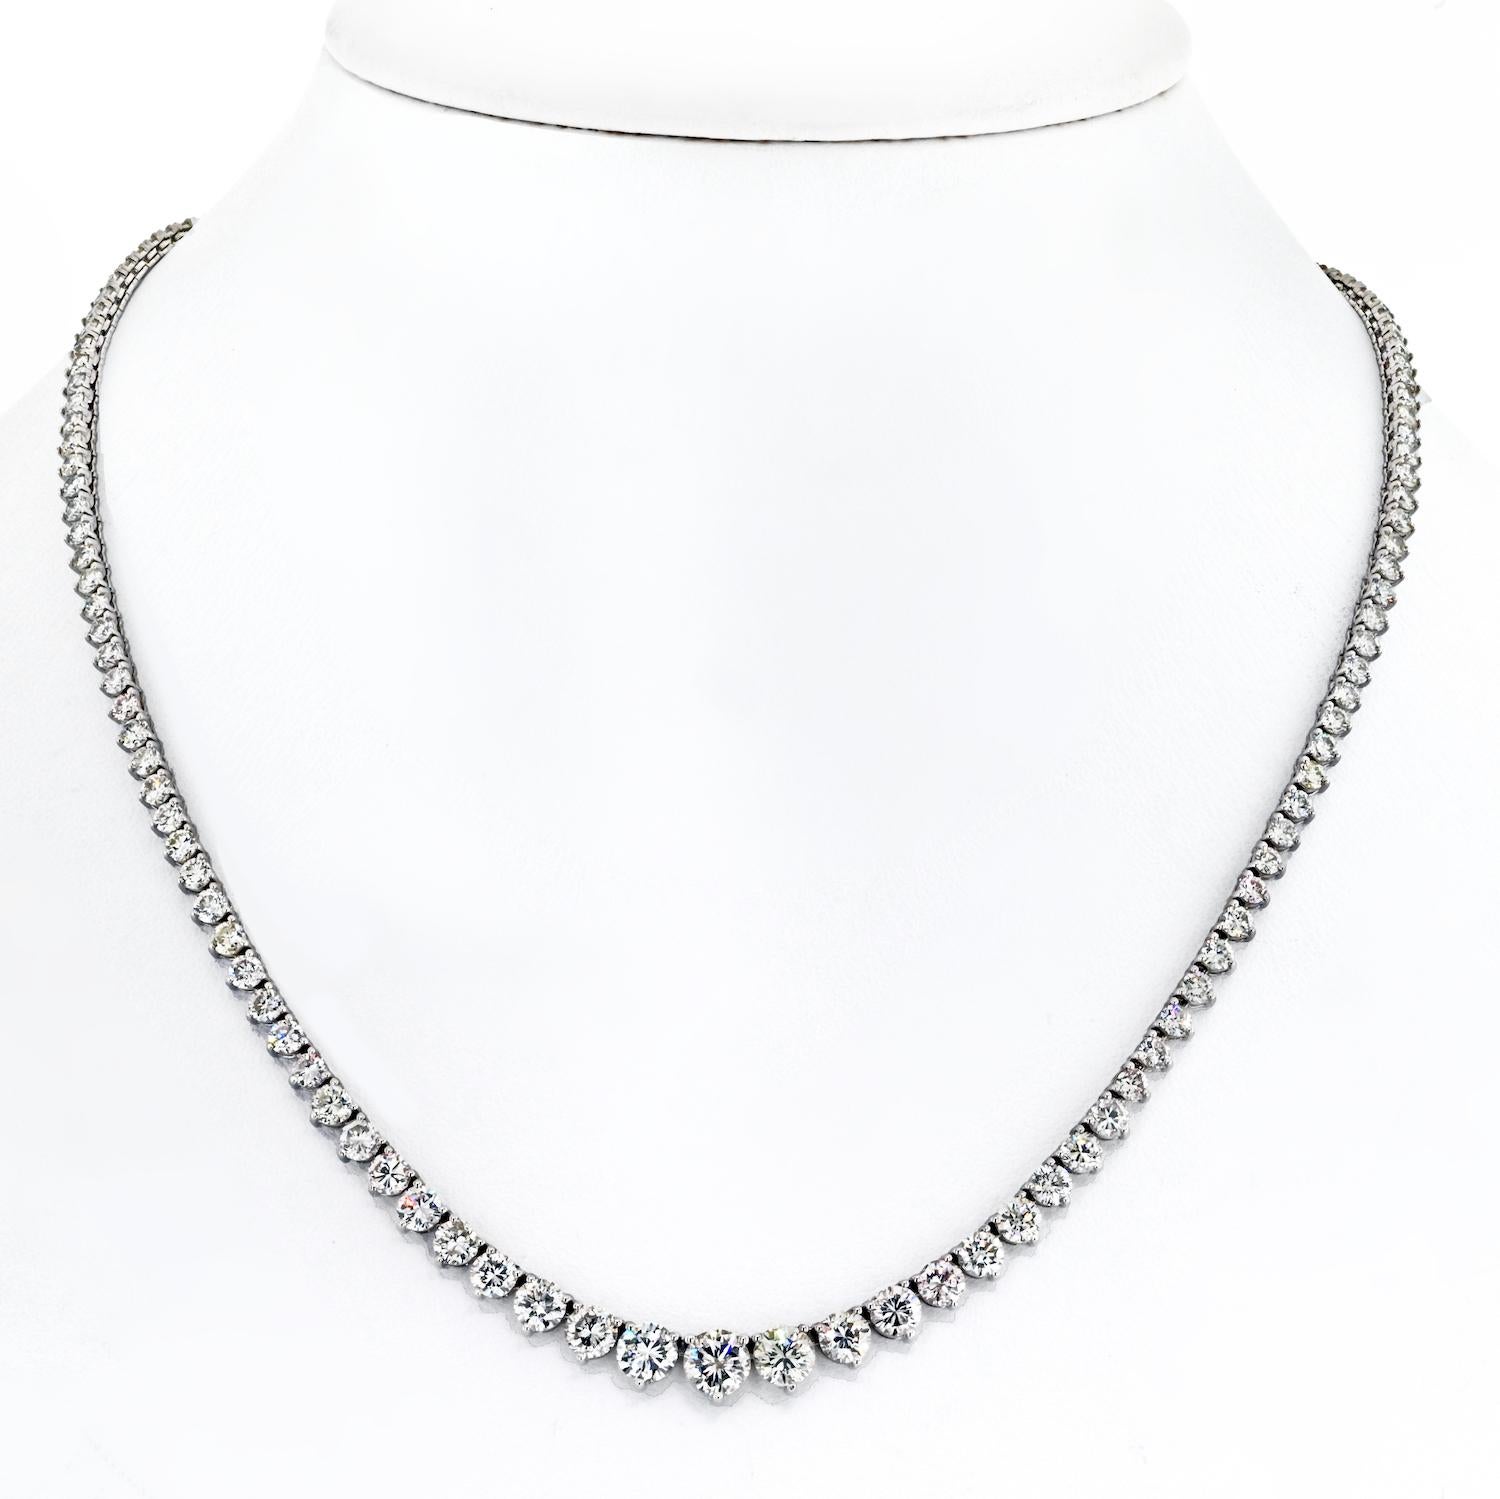 Elevate your style with the timeless beauty of the 14K White Gold Graduated Riviera Diamond Necklace. This exquisite piece is a testament to refined craftsmanship, showcasing a graduated arrangement of dazzling diamonds set in lustrous 14K white